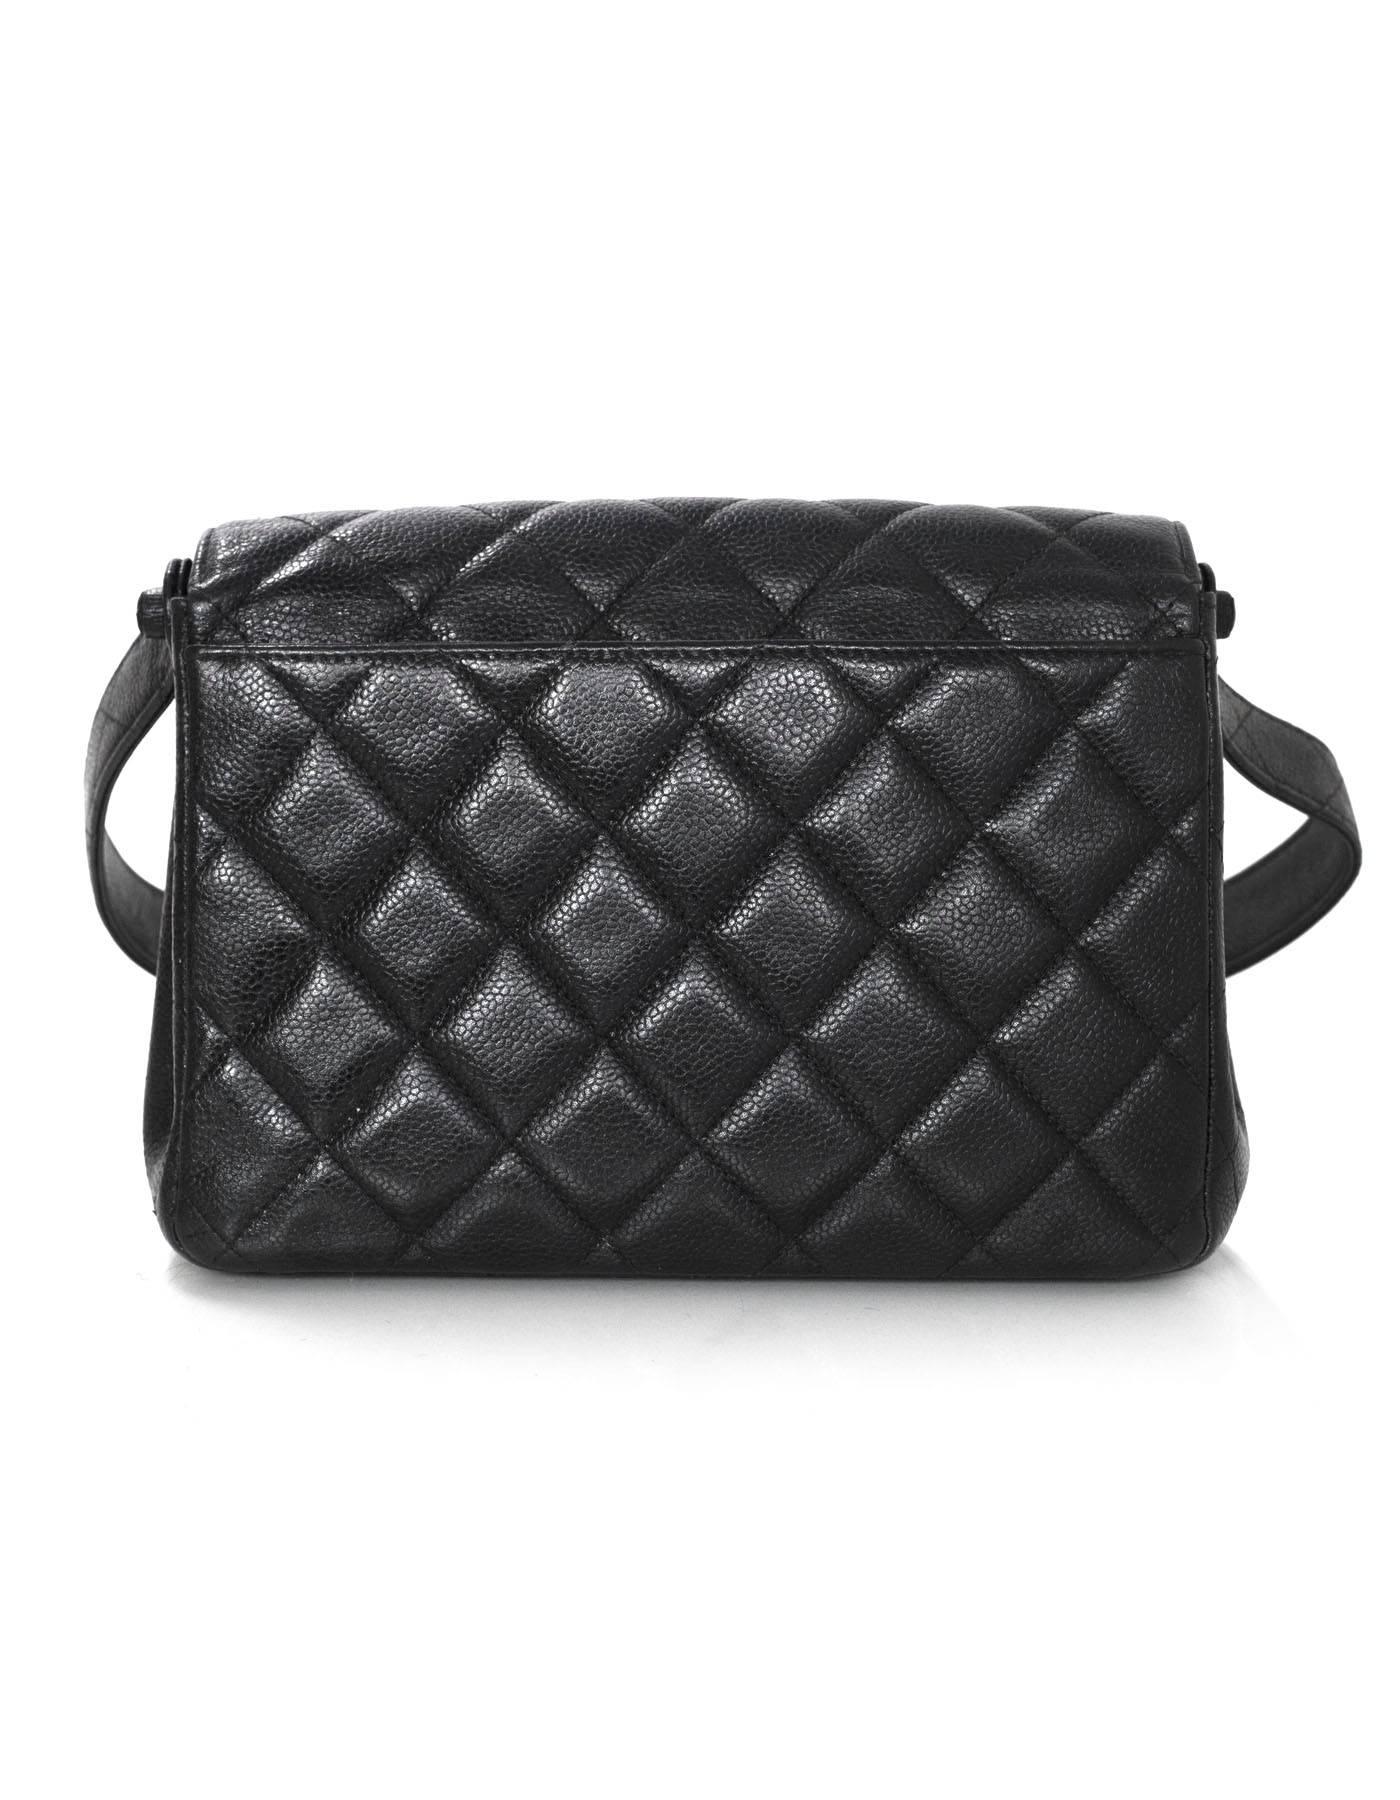 Women's Chanel Black Quilted Caviar Leather Shoulder Bag